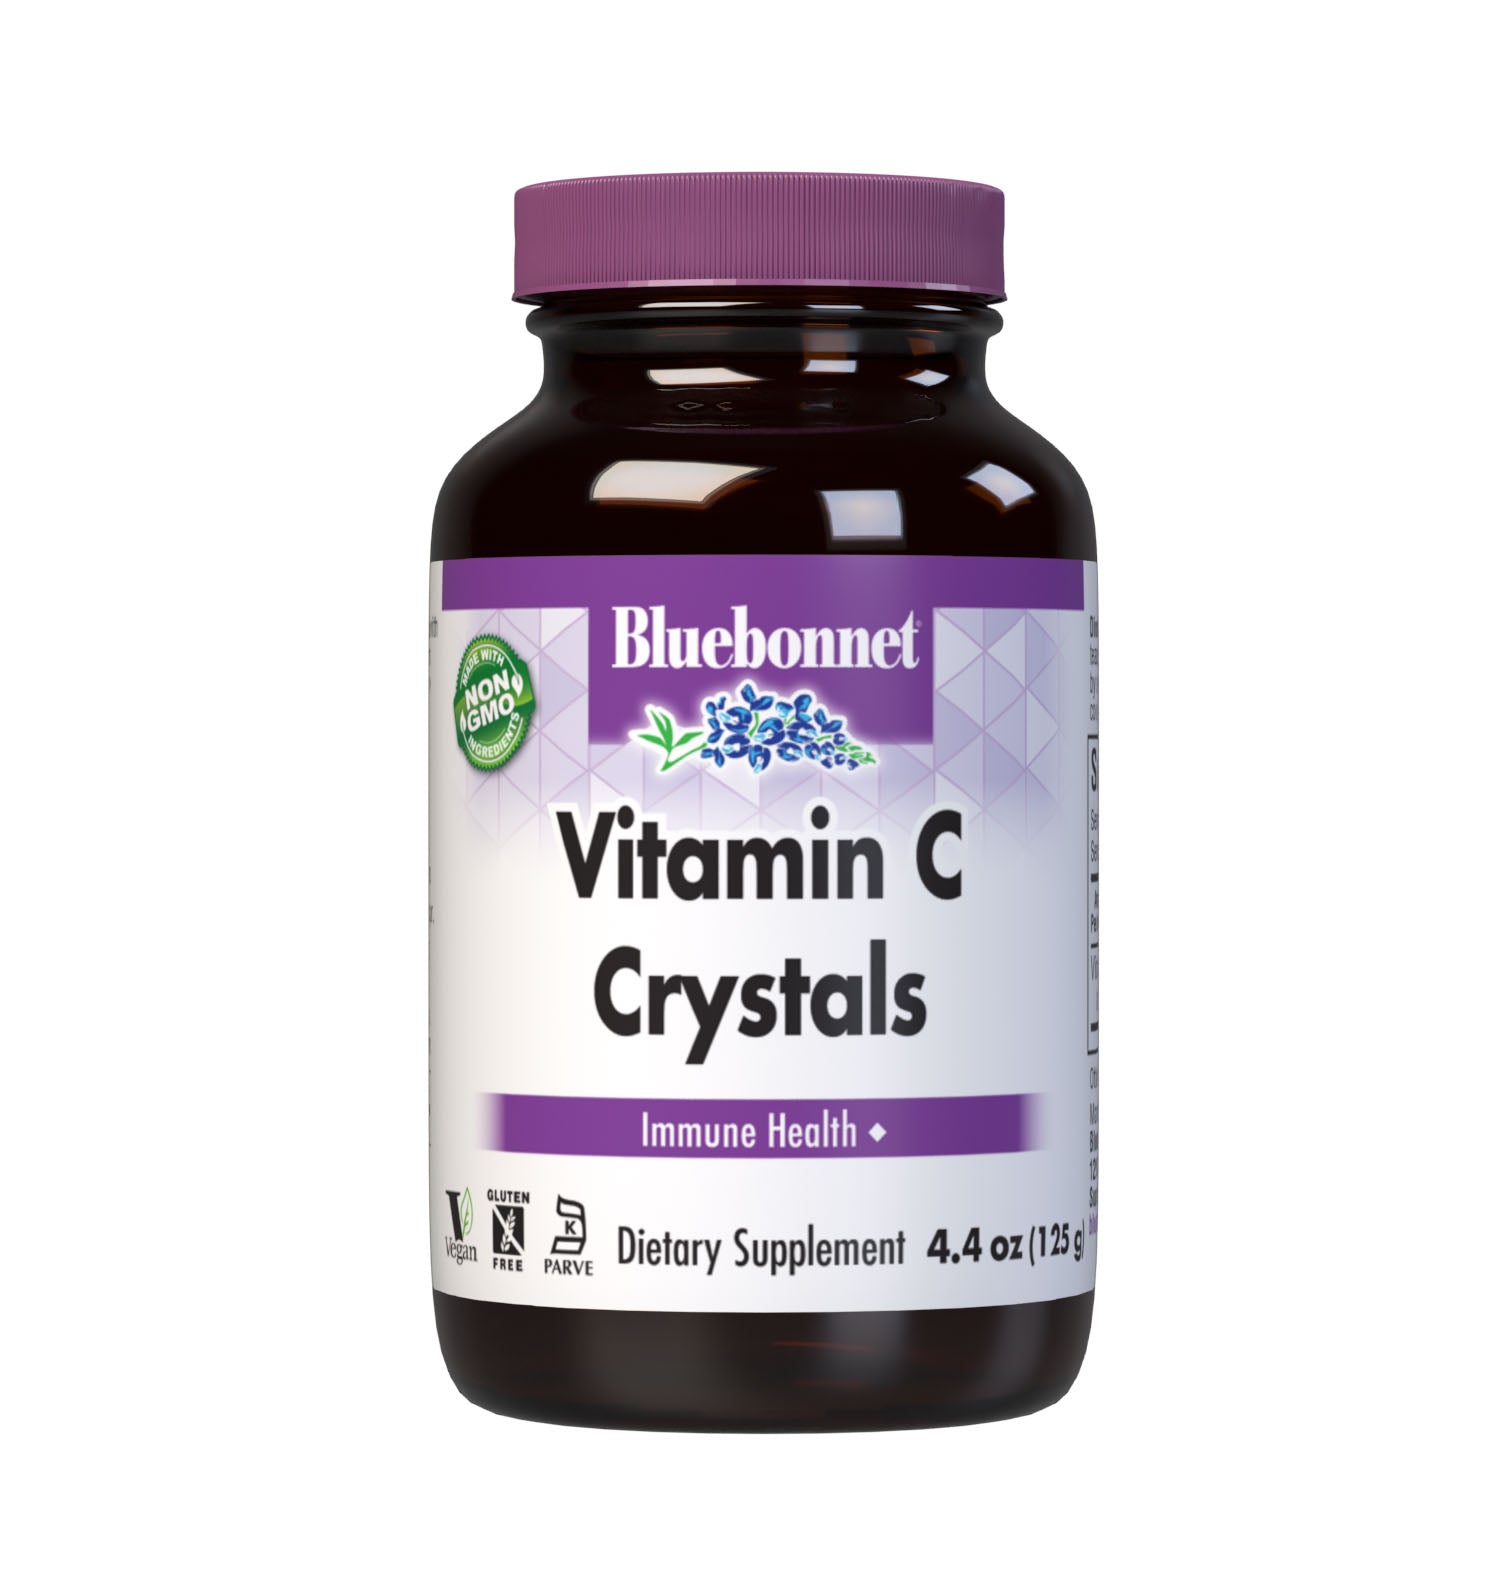 Bluebonnet’s Vitamin C Crystals are formulated with identity preserved (IP) L-ascorbic acid in its crystalline form to help support immune function. There are no excipients present. #size_4.4oz